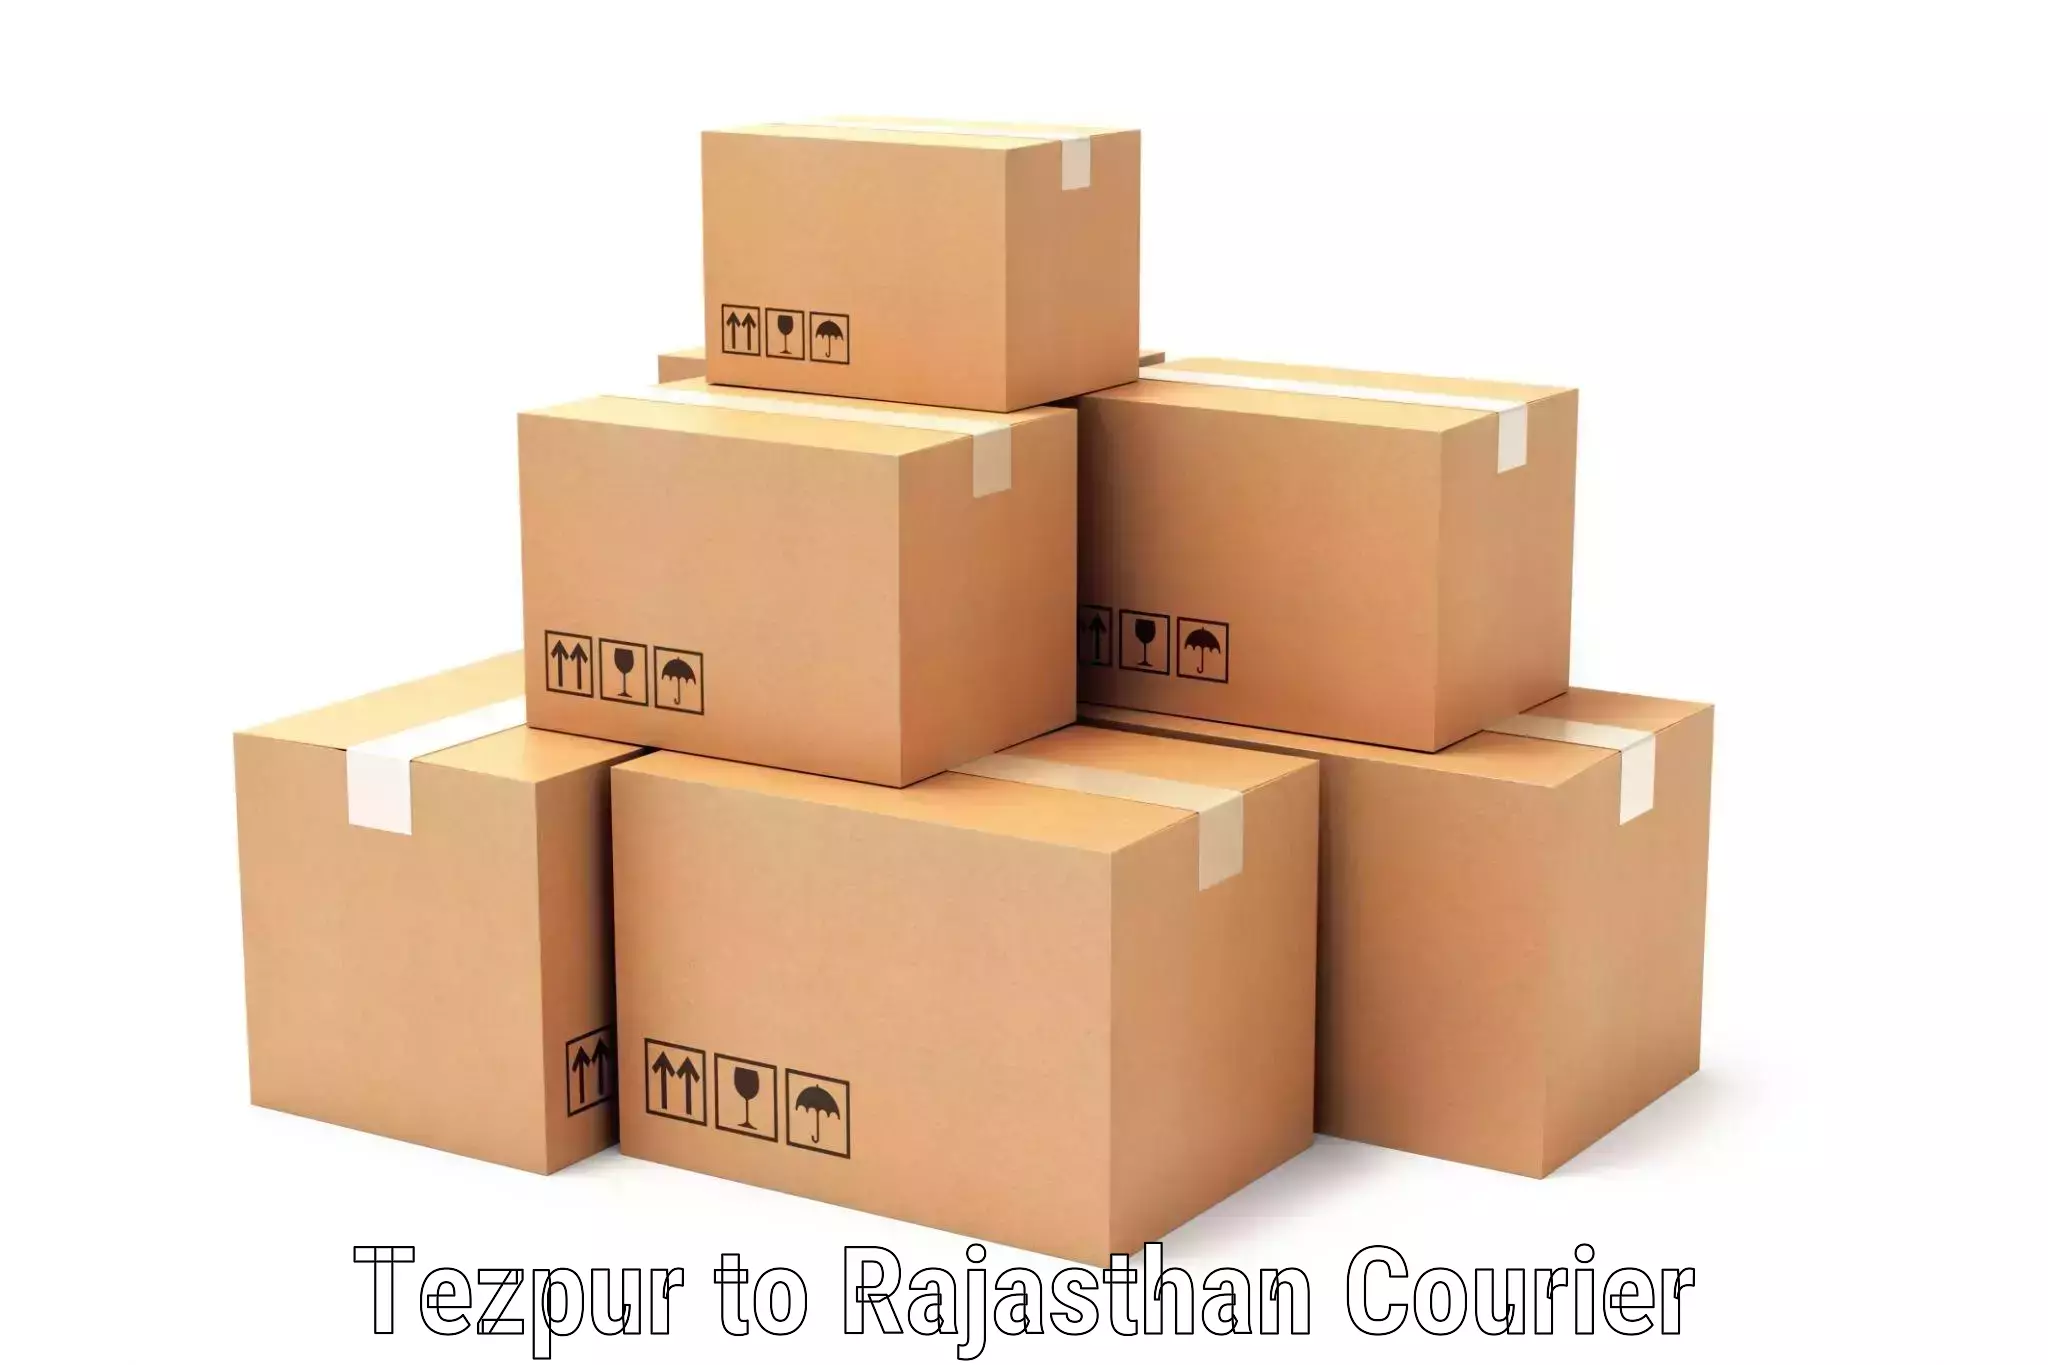 Speedy delivery service Tezpur to Rajasthan